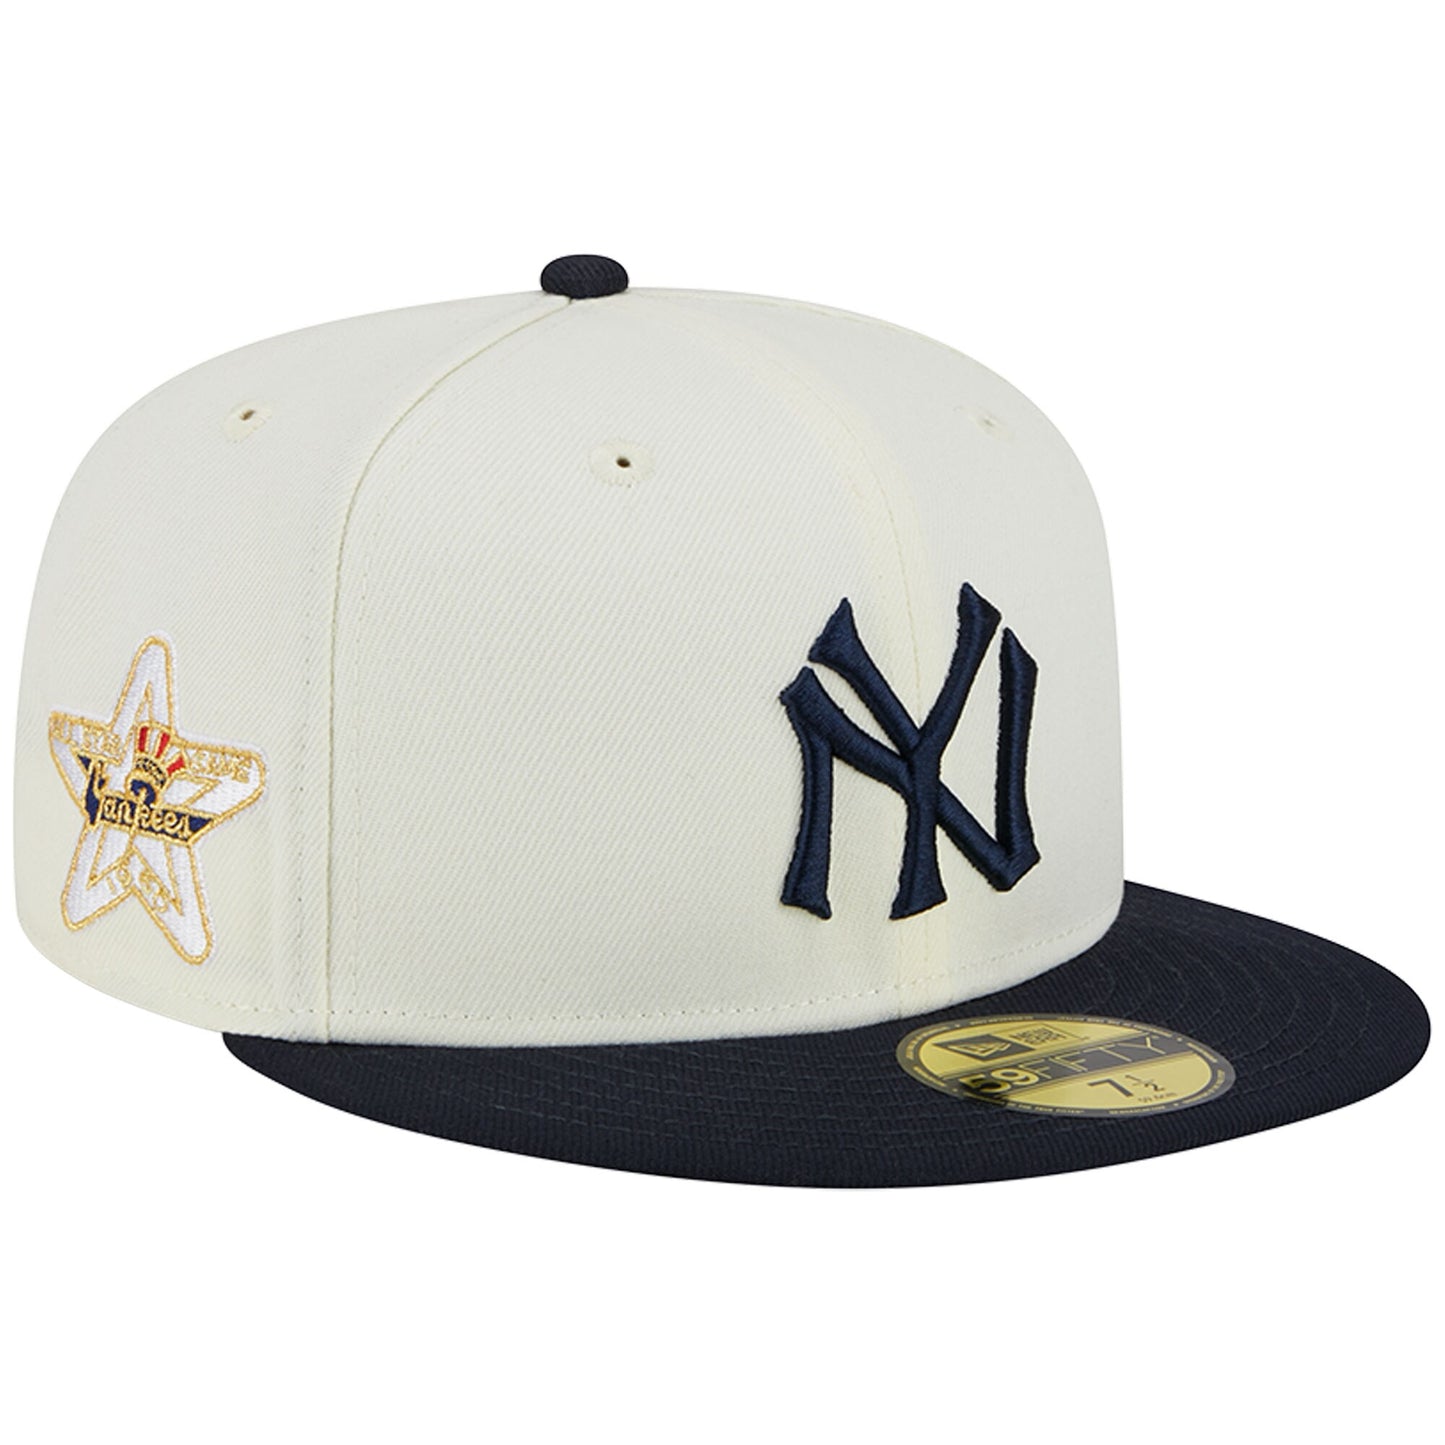 New York Yankees New Era Retro 59FIFTY Fitted Hat - Stone/Navy